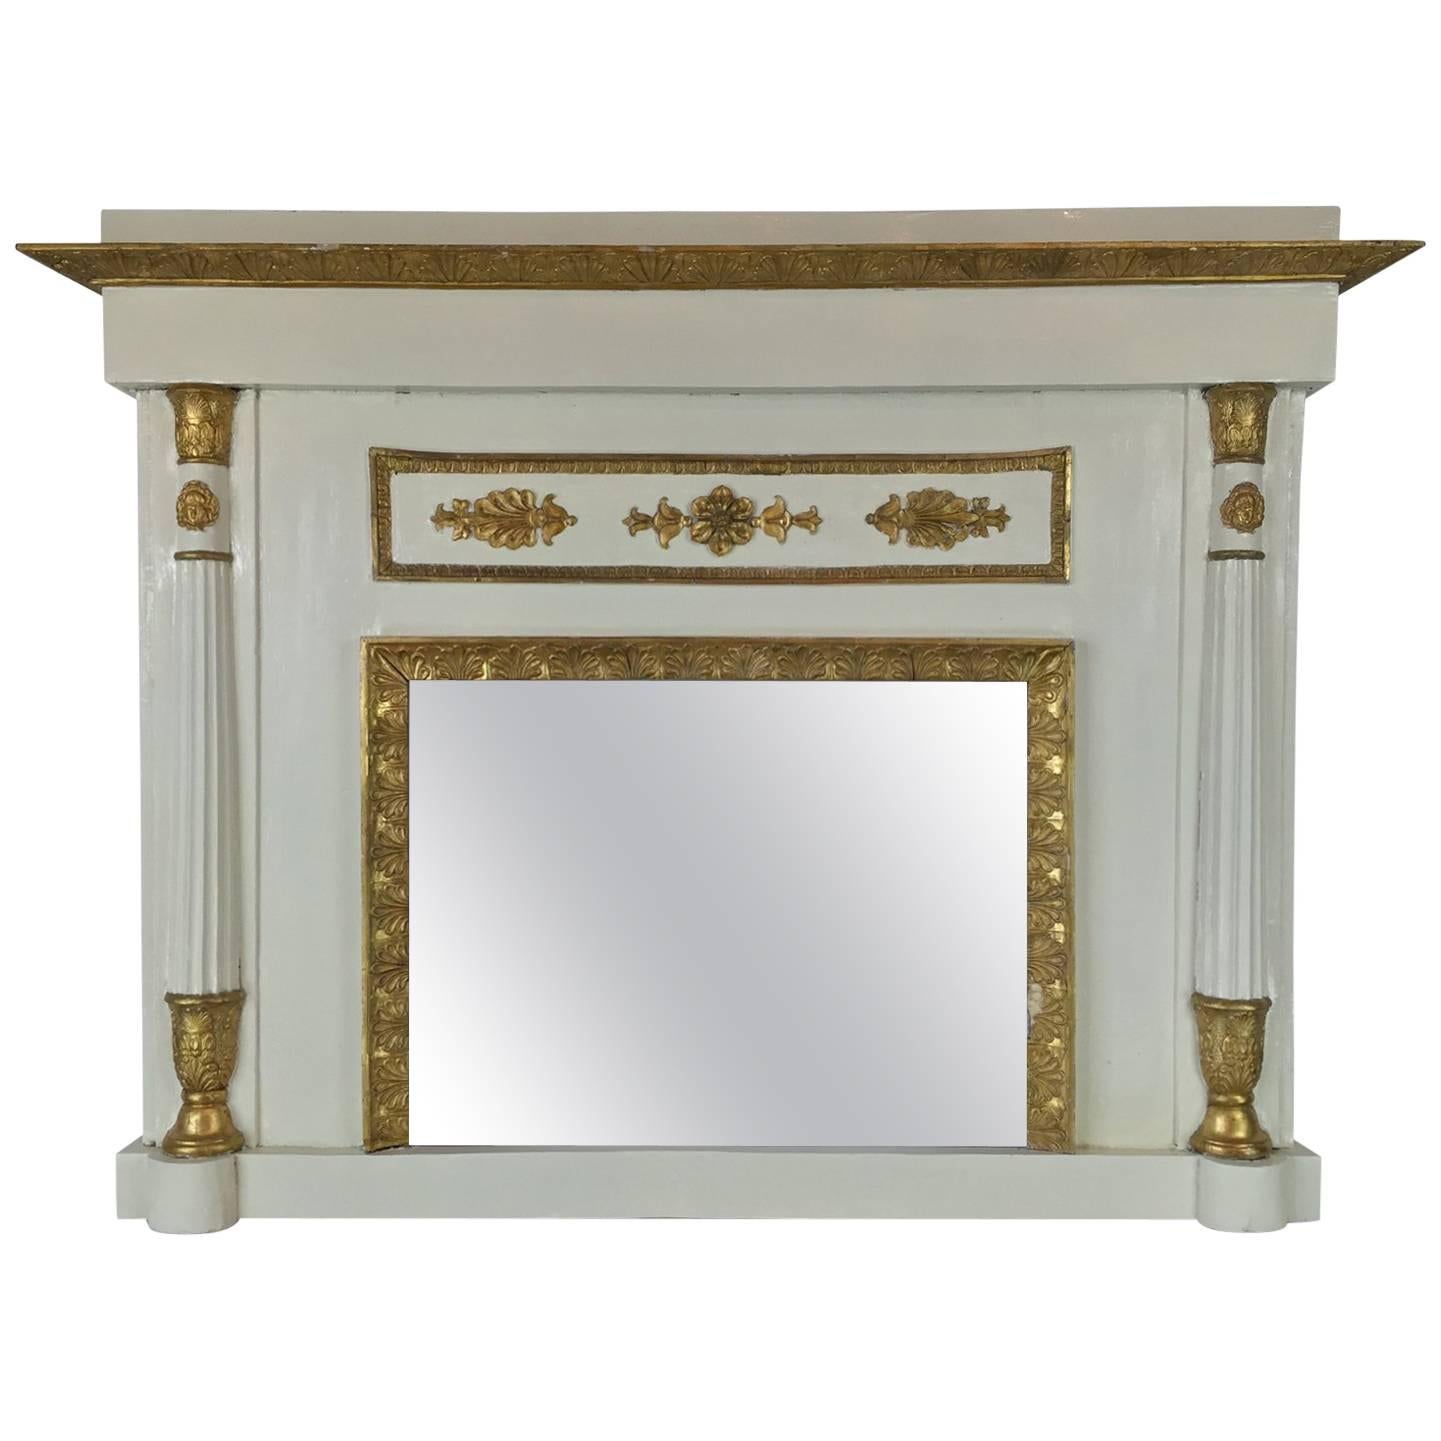 Early 19th Century Italian Neoclassical Mirror Ivory and Giltwood Overmantel 